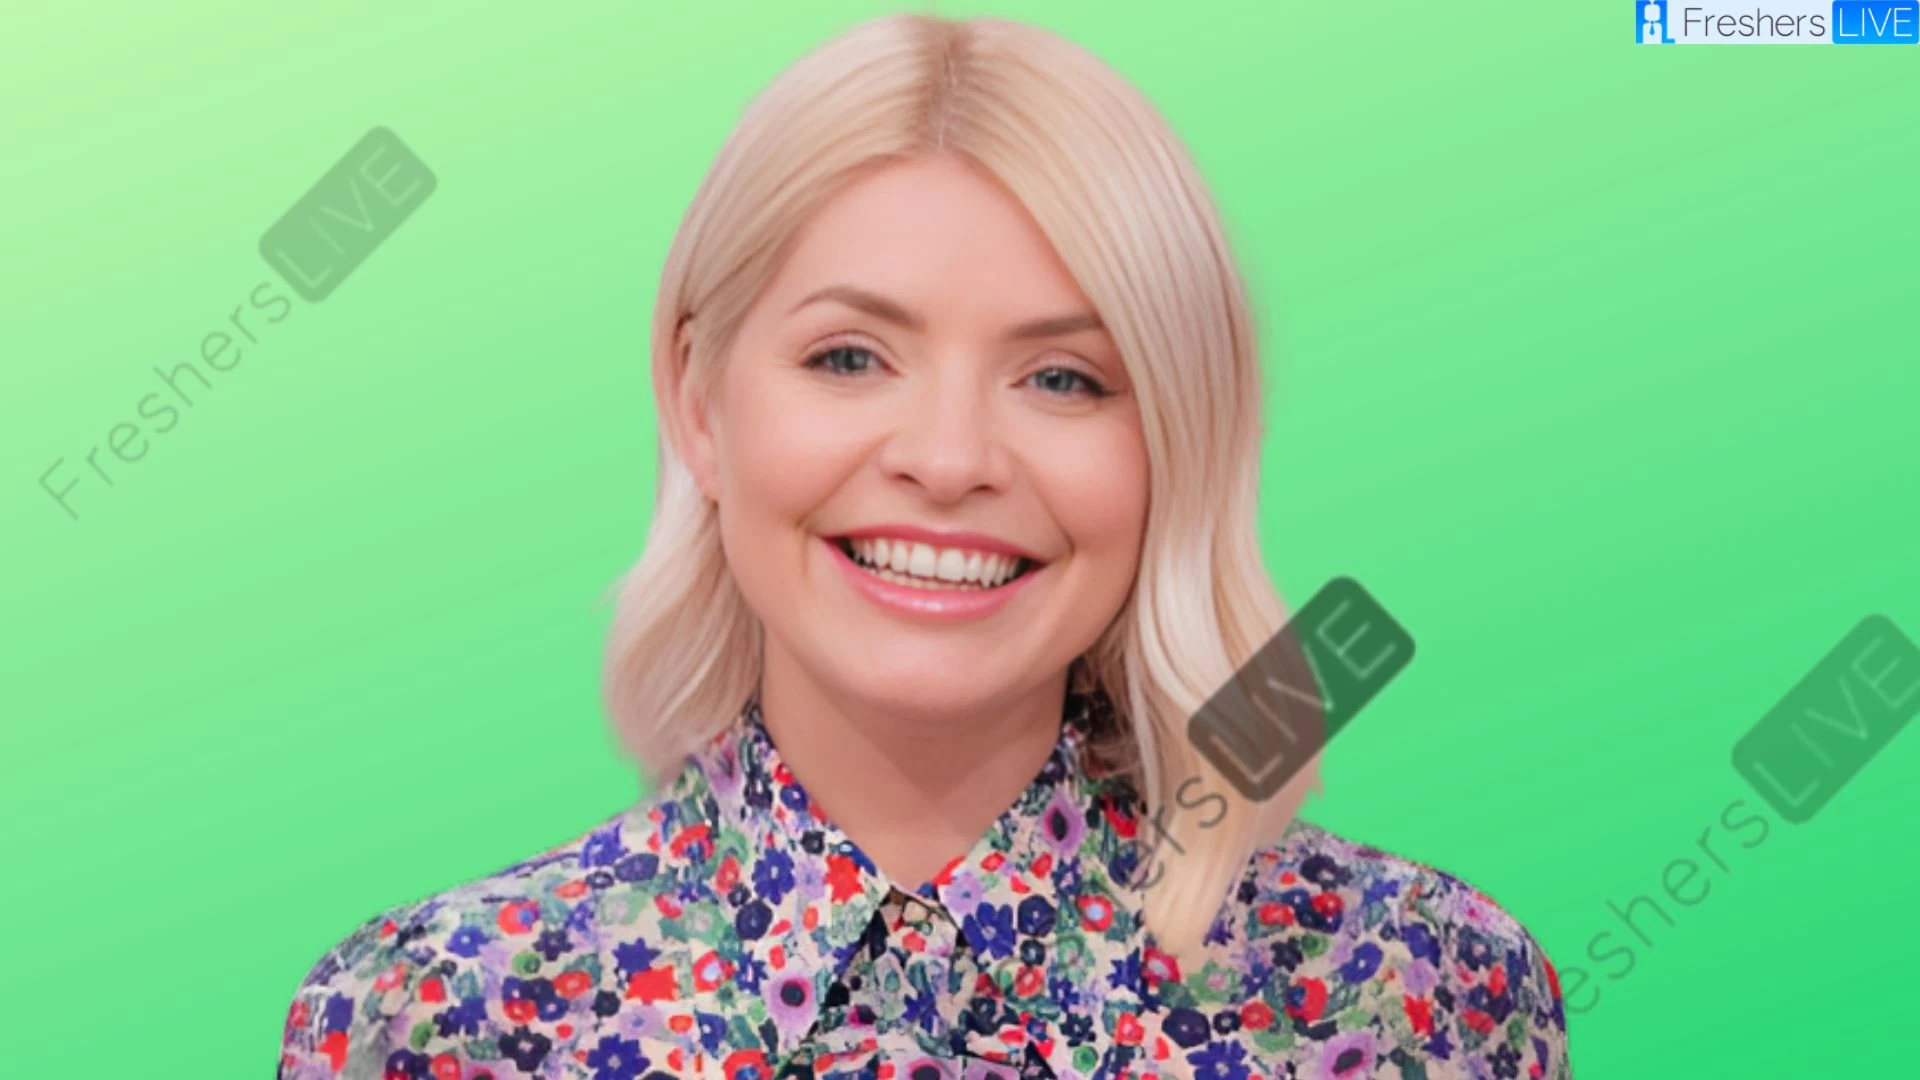 Holly Willoughby Religion What Religion is Holly Willoughby? Is Holly Willoughby a Christian?